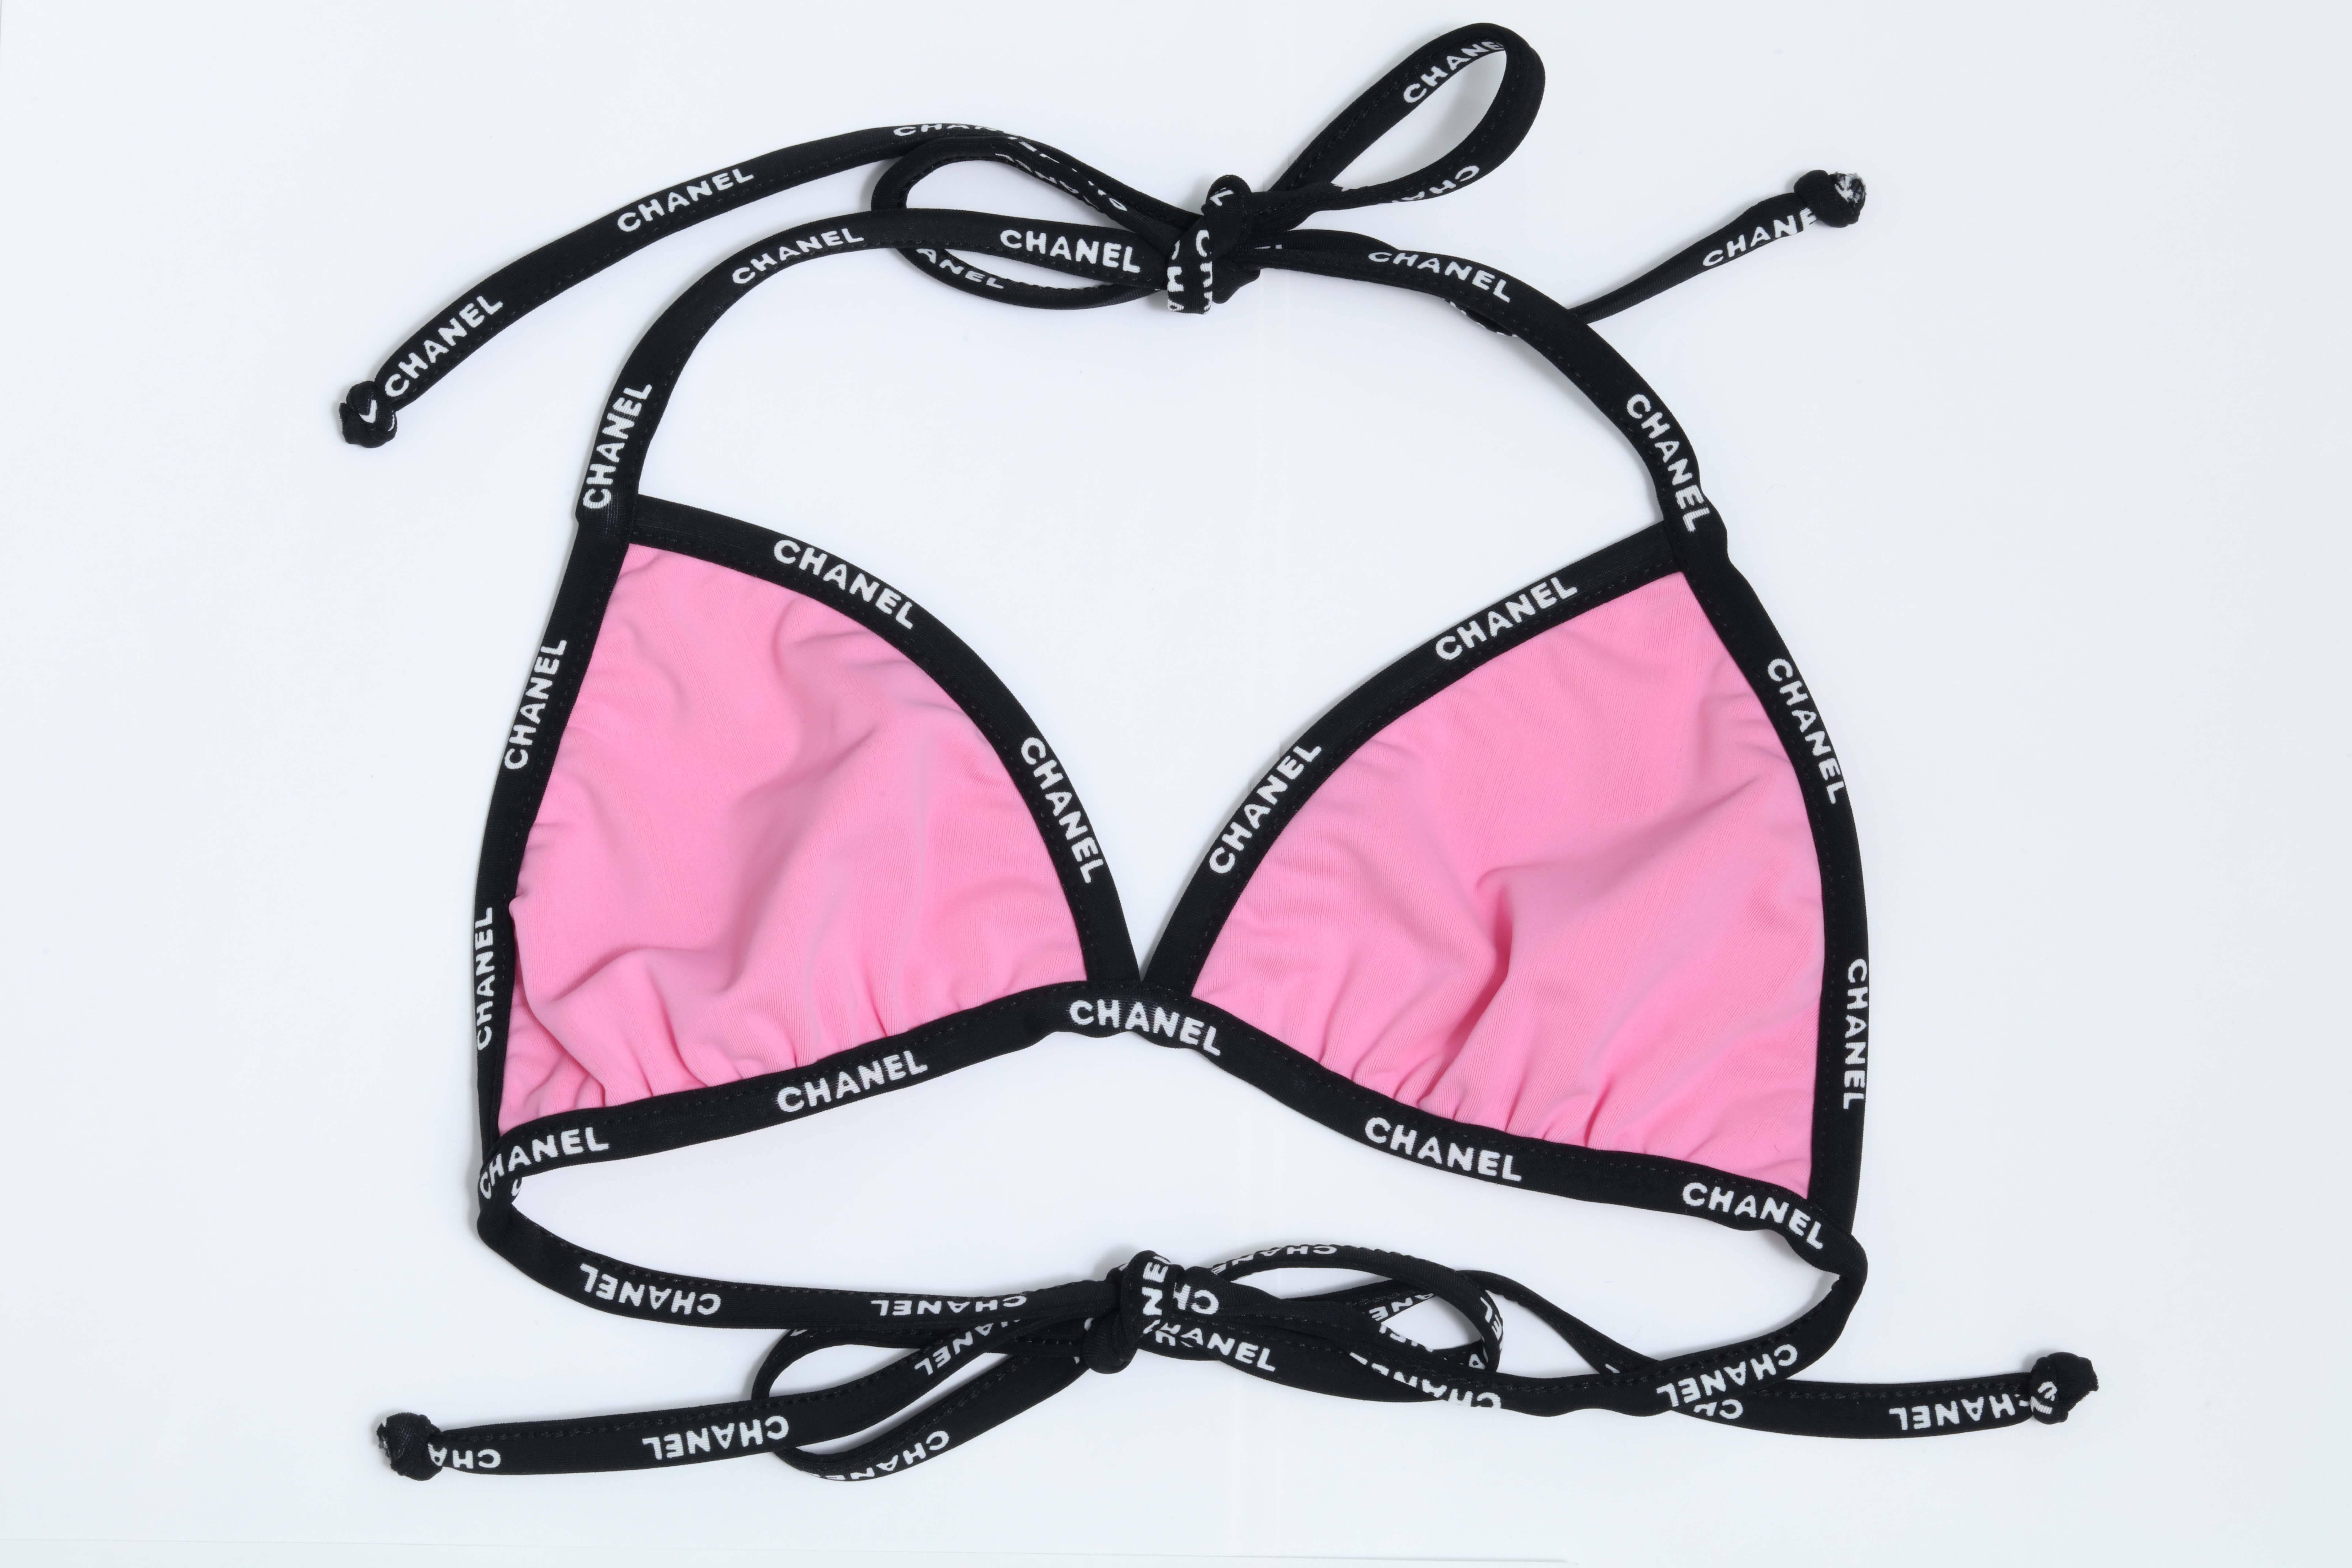 Extremely rare Chanel pink bikini with logos. Size FR 38